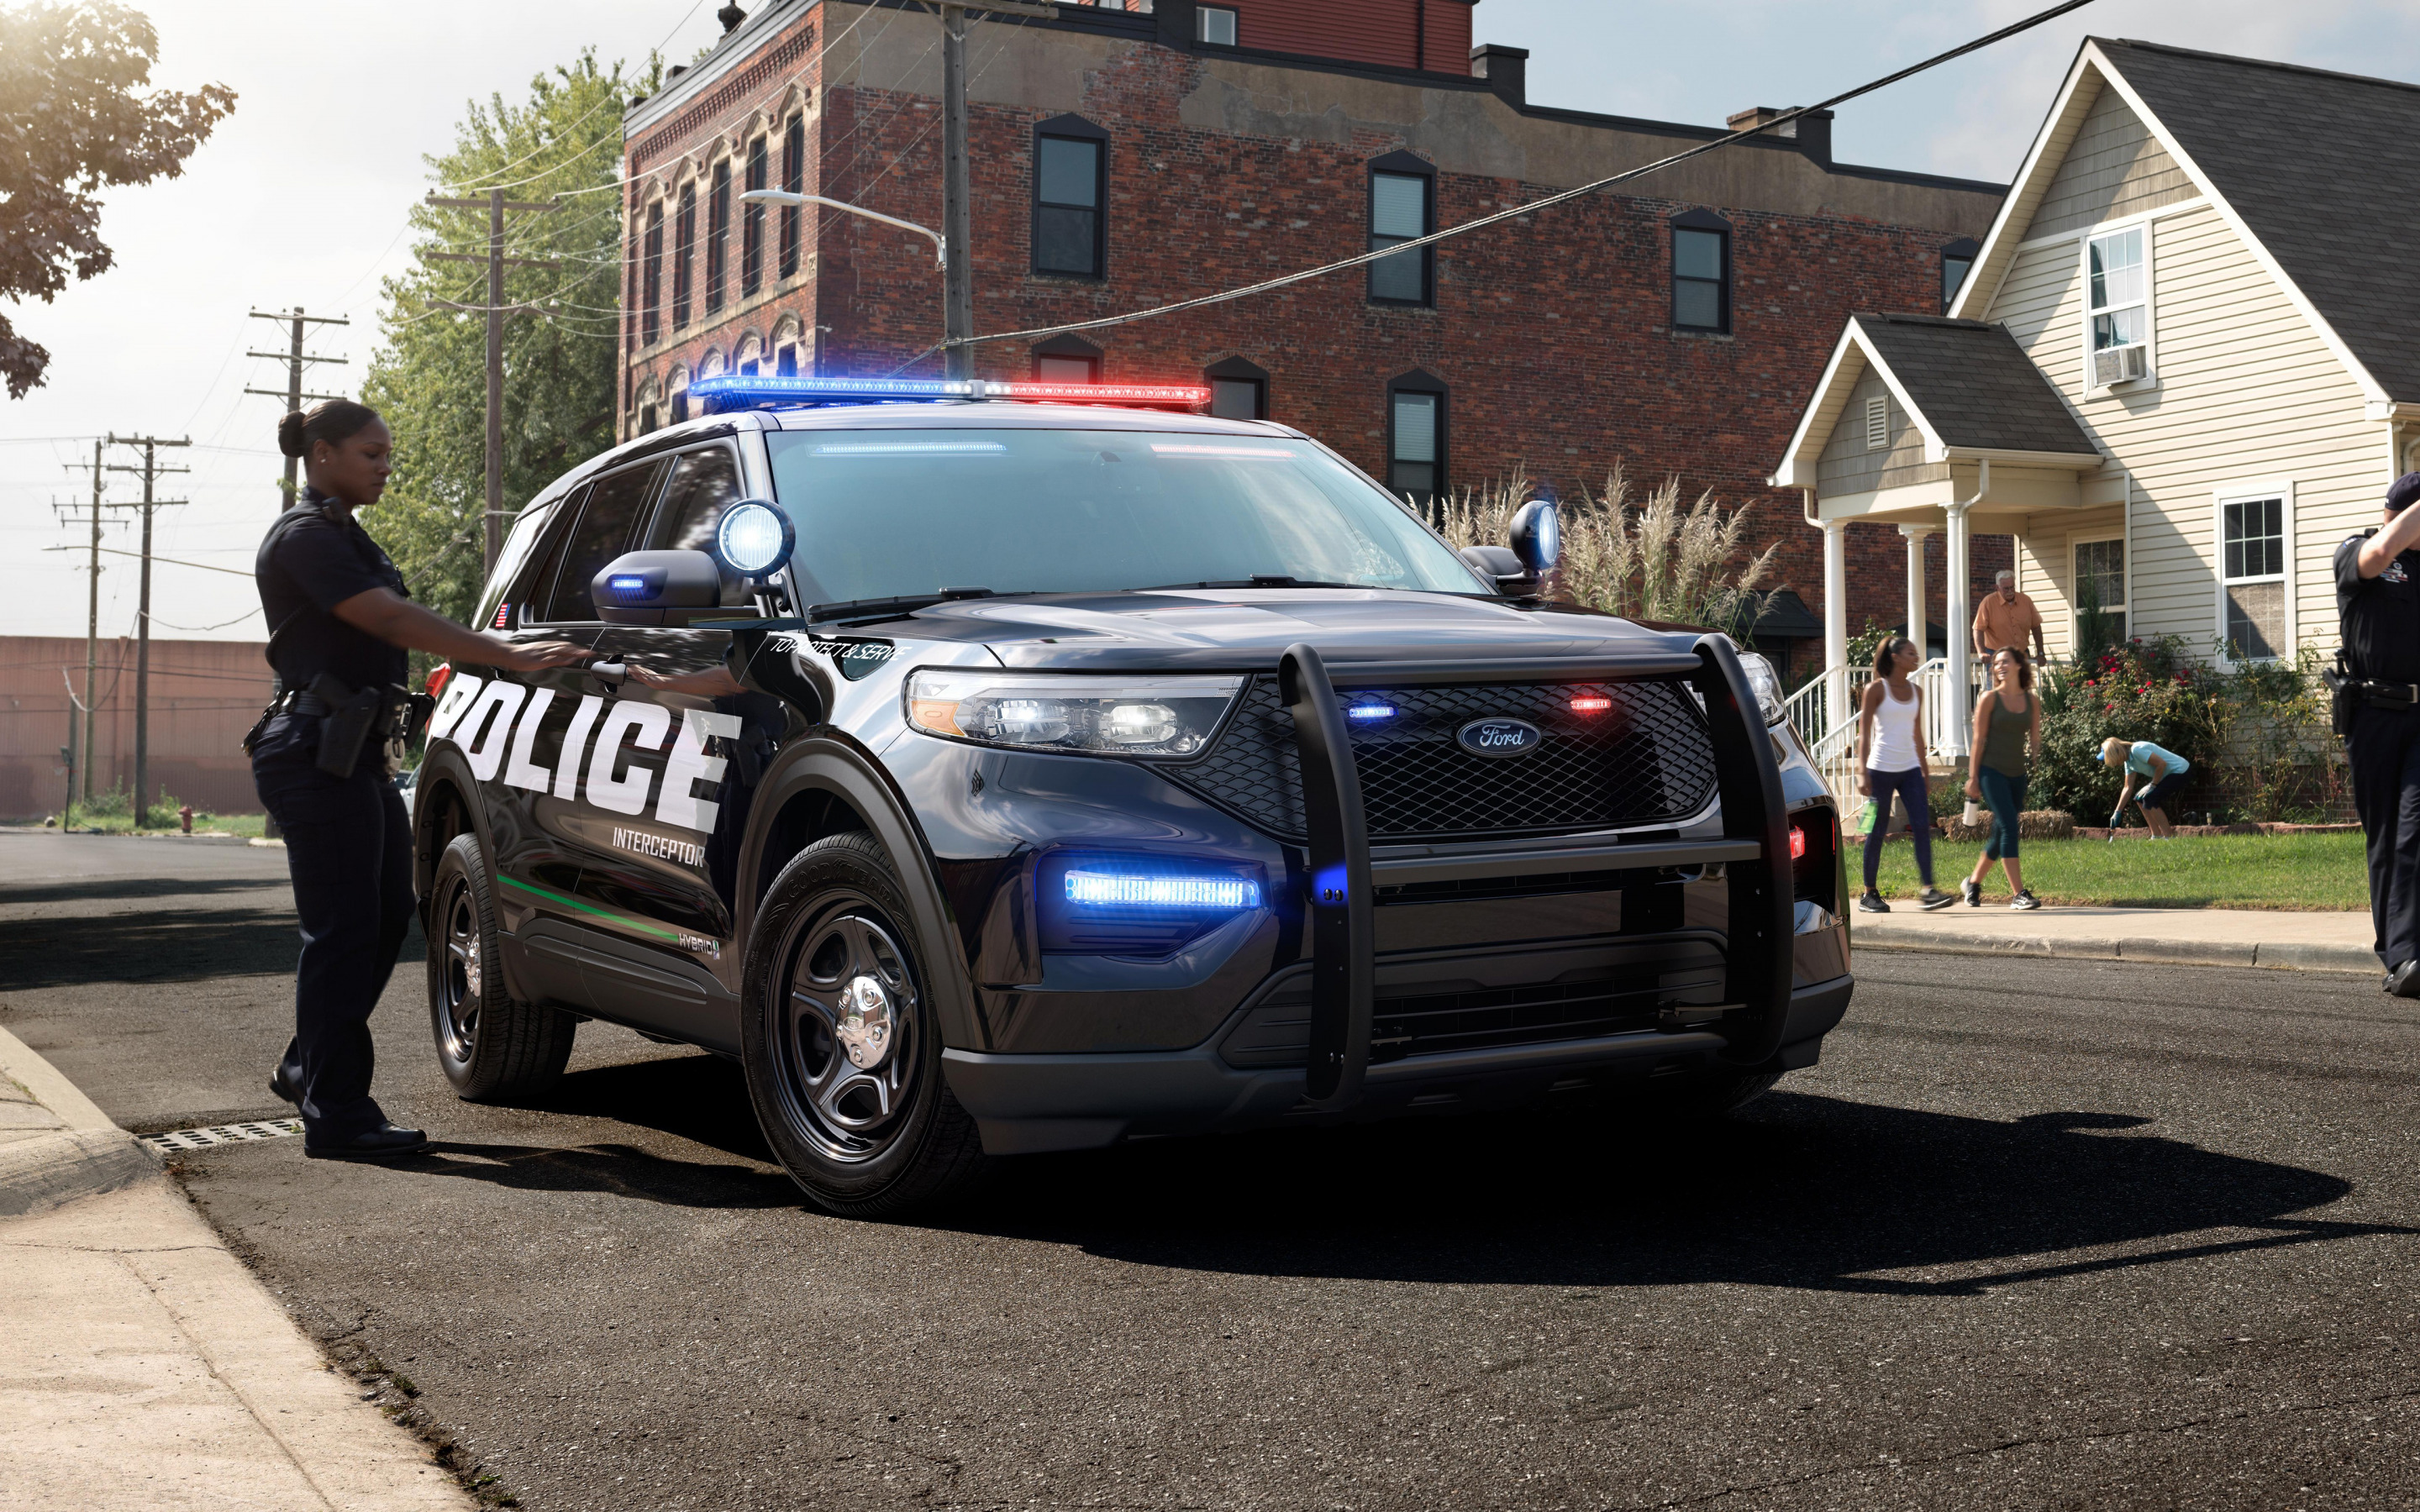 Download wallpapers Ford Police Interceptor, 2020, Hybrid SUV, new police c...